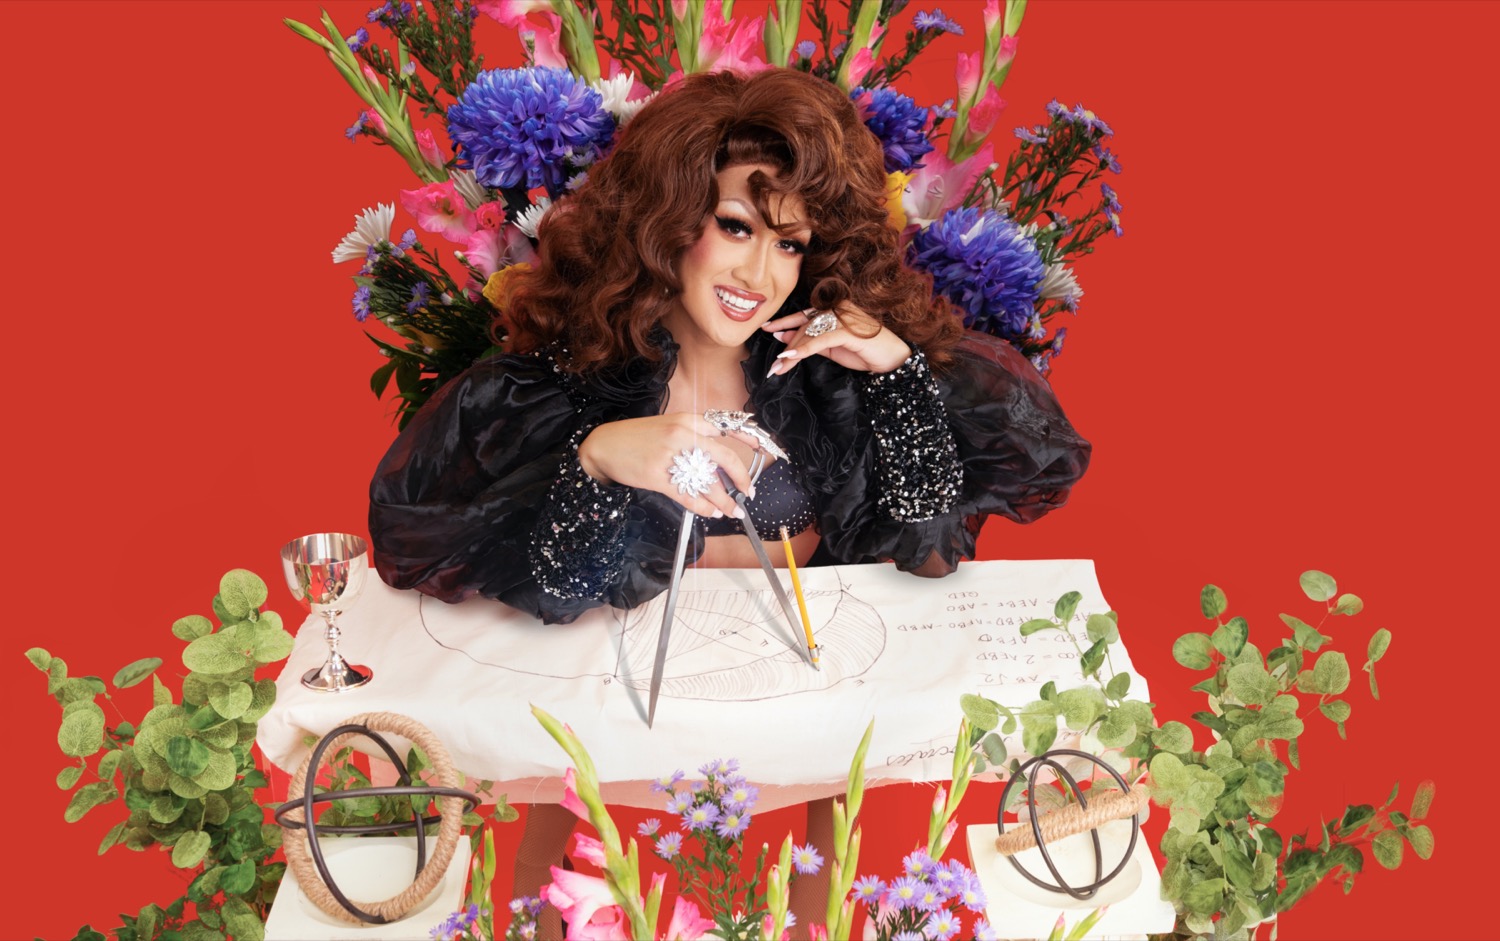 a white drag queen sitting at an extremely decorative desk with lots of bouquets of flowers around her. she's smiling at the camera sitting behind the desk holding a protractor over a sheet of paper, which has markings on it